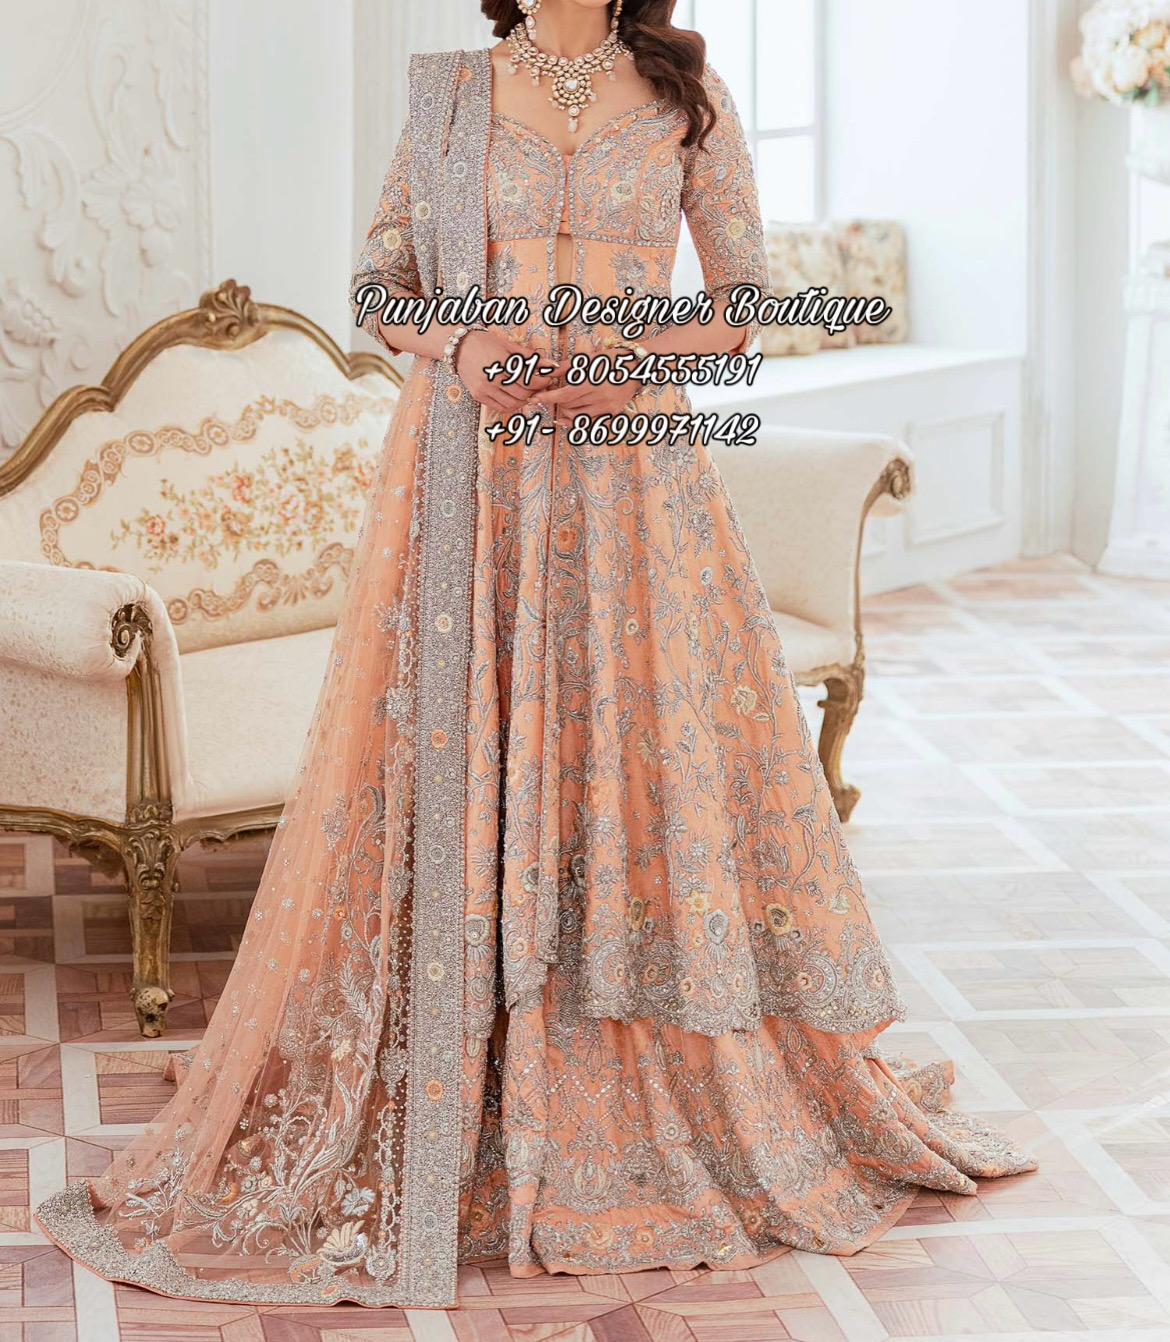 Wedding Gown, Designer Gown With Dupatta for Women in Reception Dress,  Indian Dress for Partywear Outfit, Stylish Flared Dress With Dupatta - Etsy